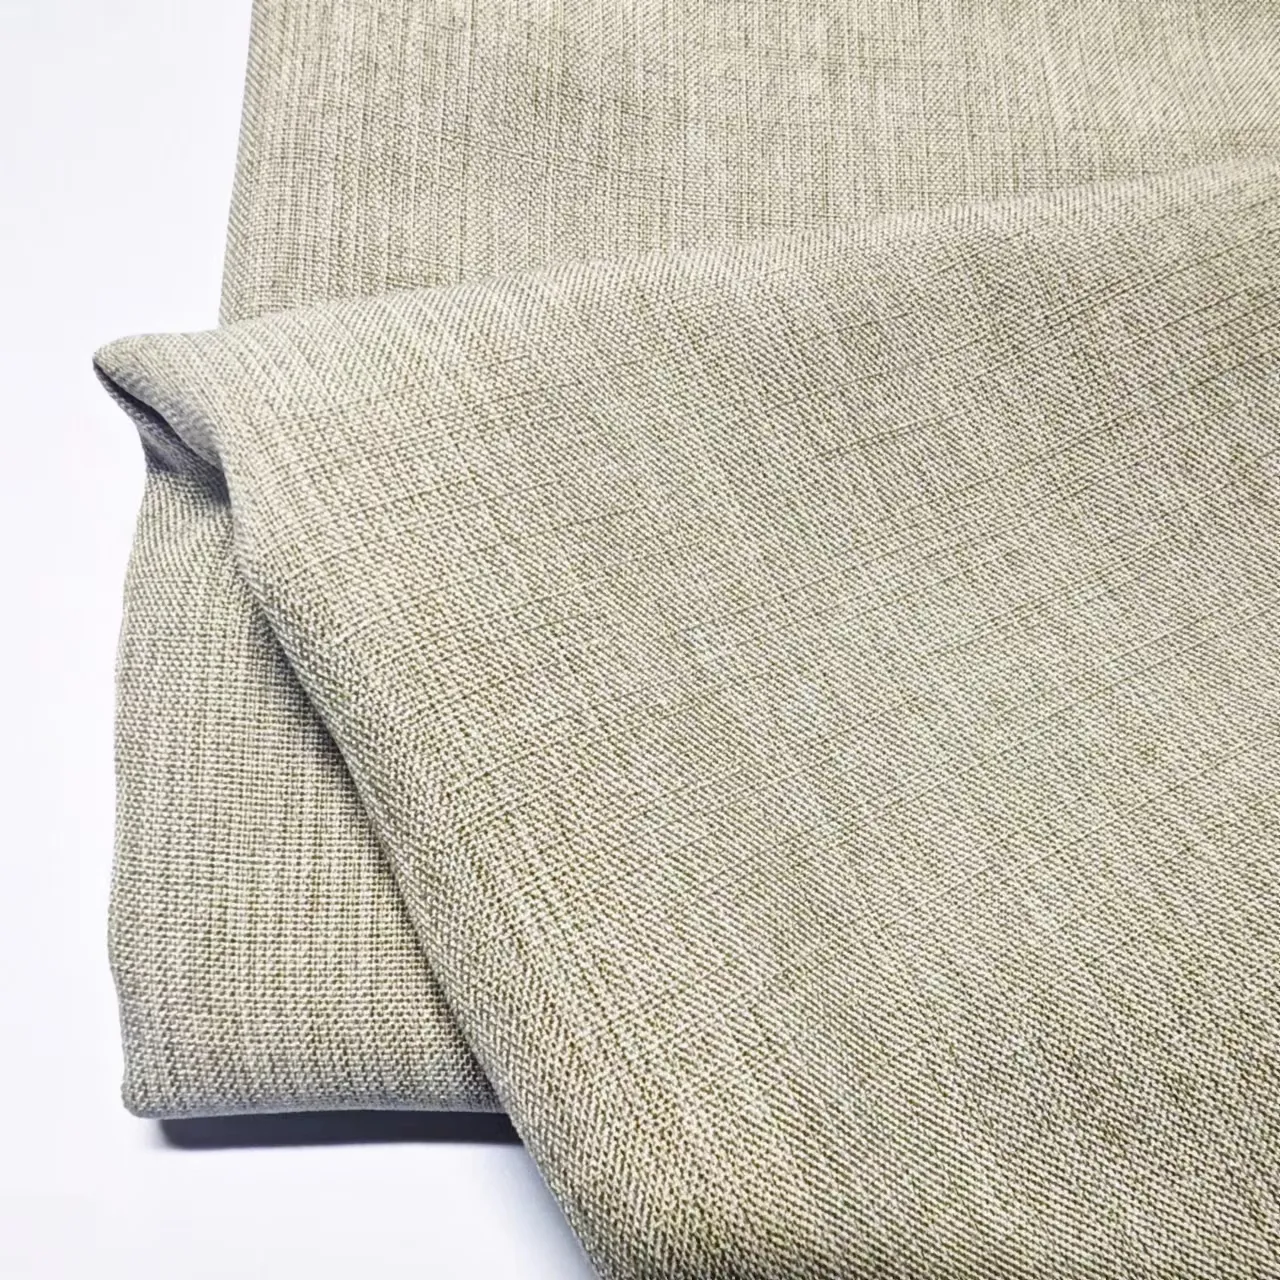 170gsm Linen Type Cloth Simulated Linen Fabric Imitation Linen Polyester Cation Fabric For Clothing